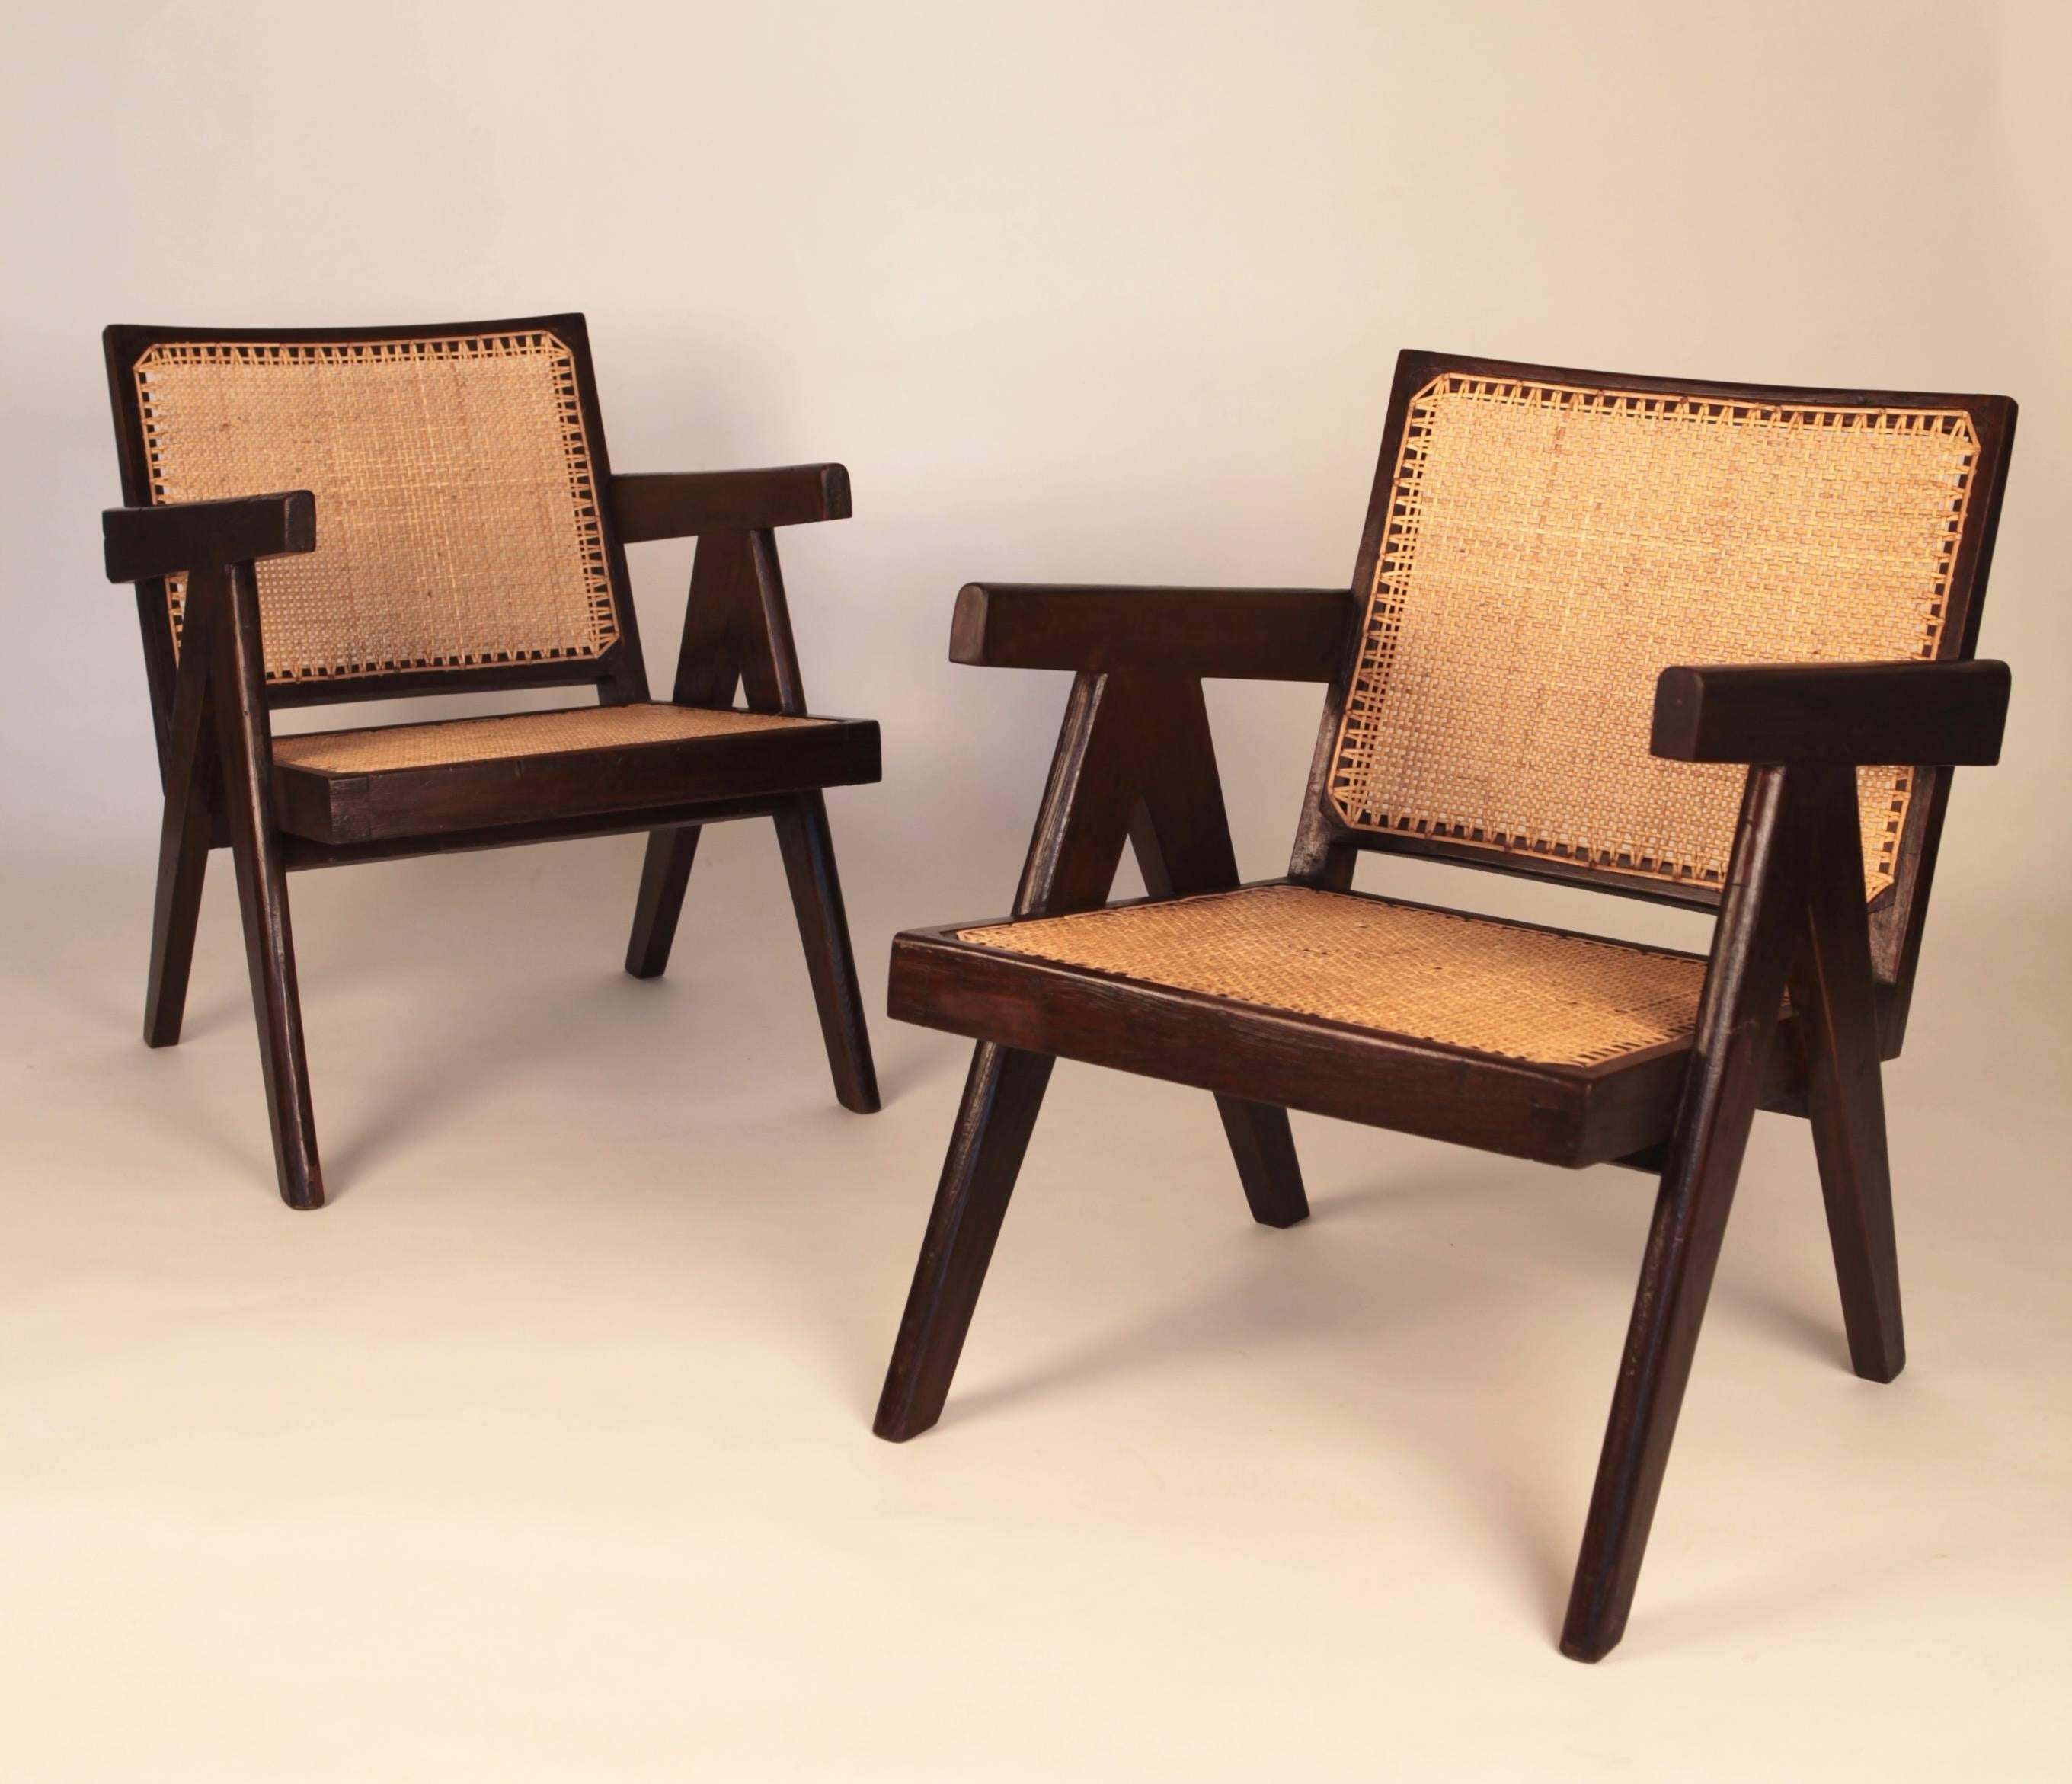 Mid-20th Century Pierre Jeanneret, Pair of Easy Armchairs, Chandigarh, India, 1955